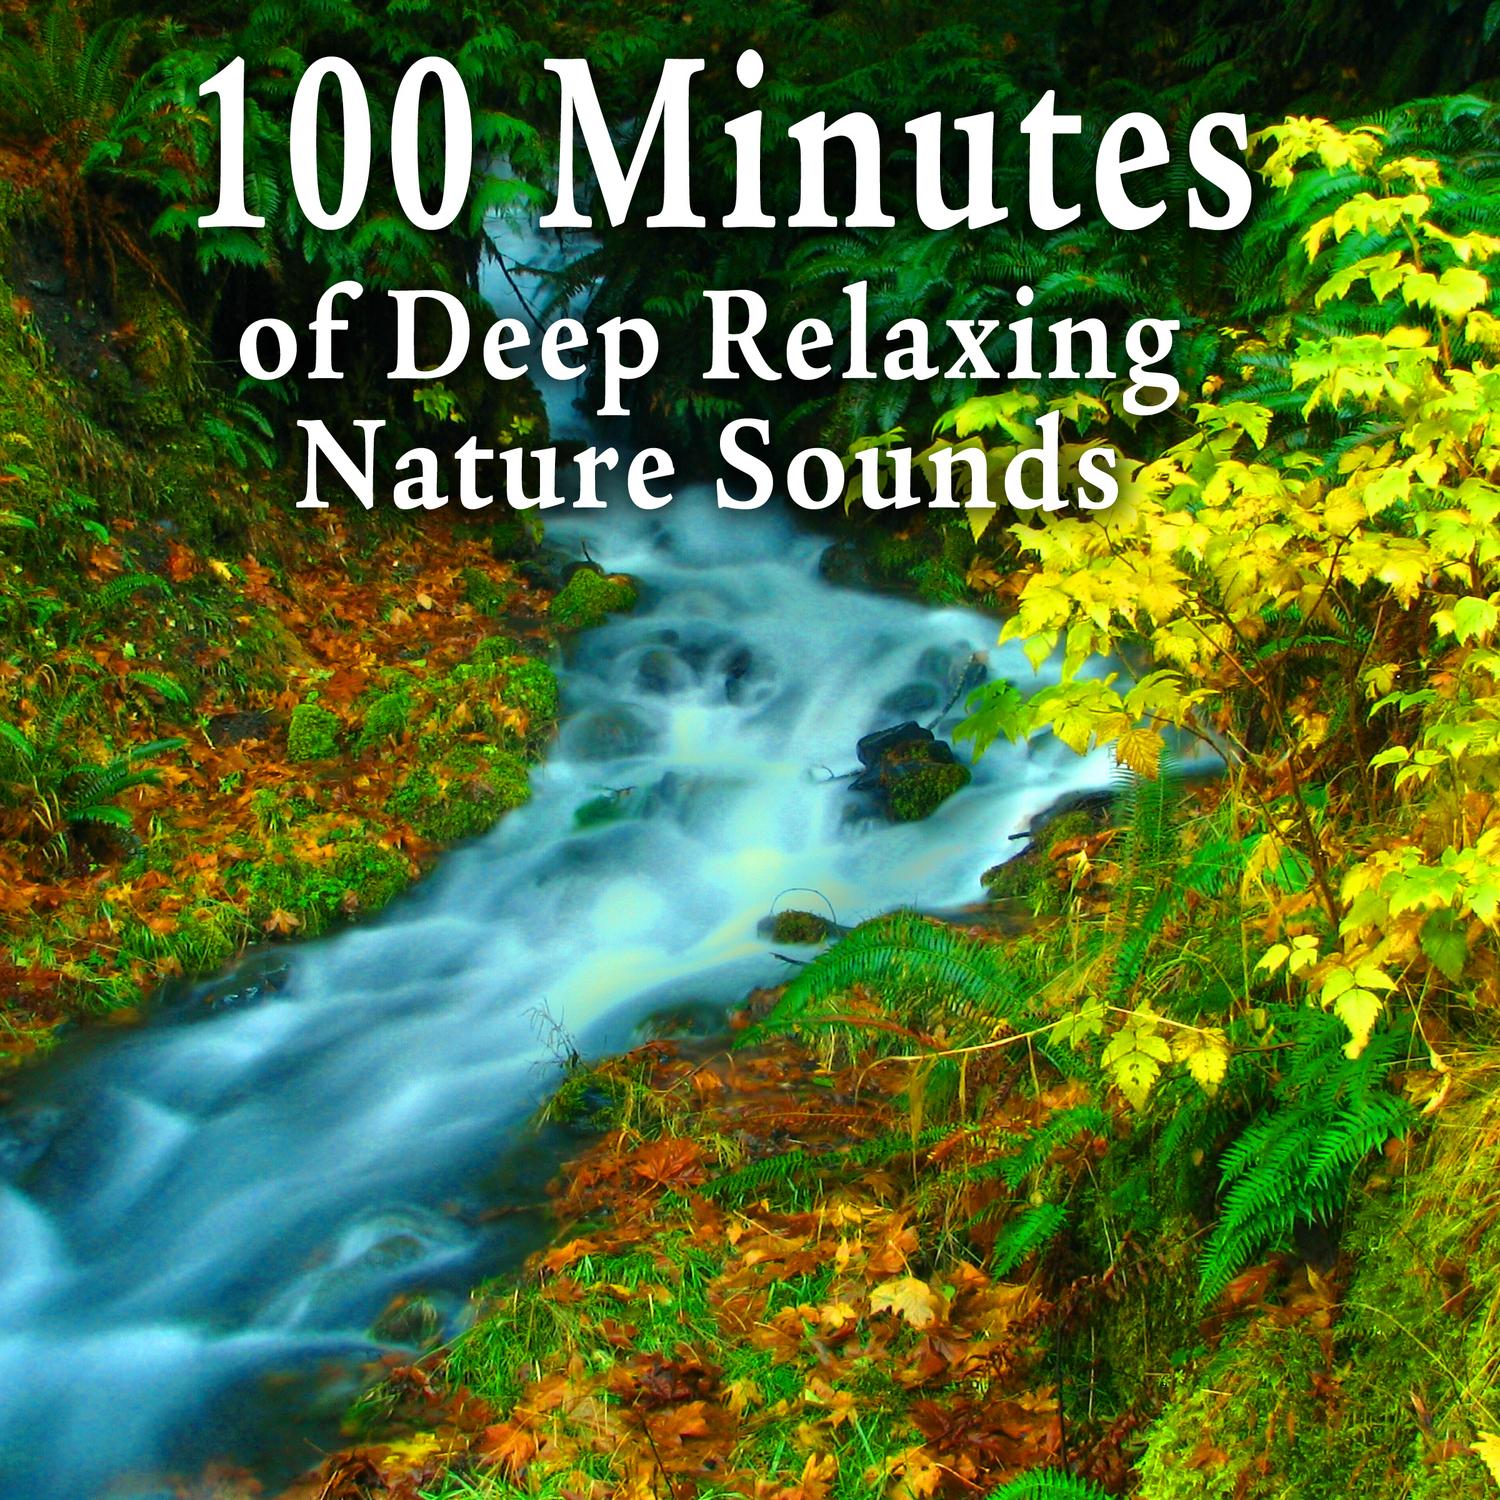 100 Minutes of Deep Relaxing Nature Sounds